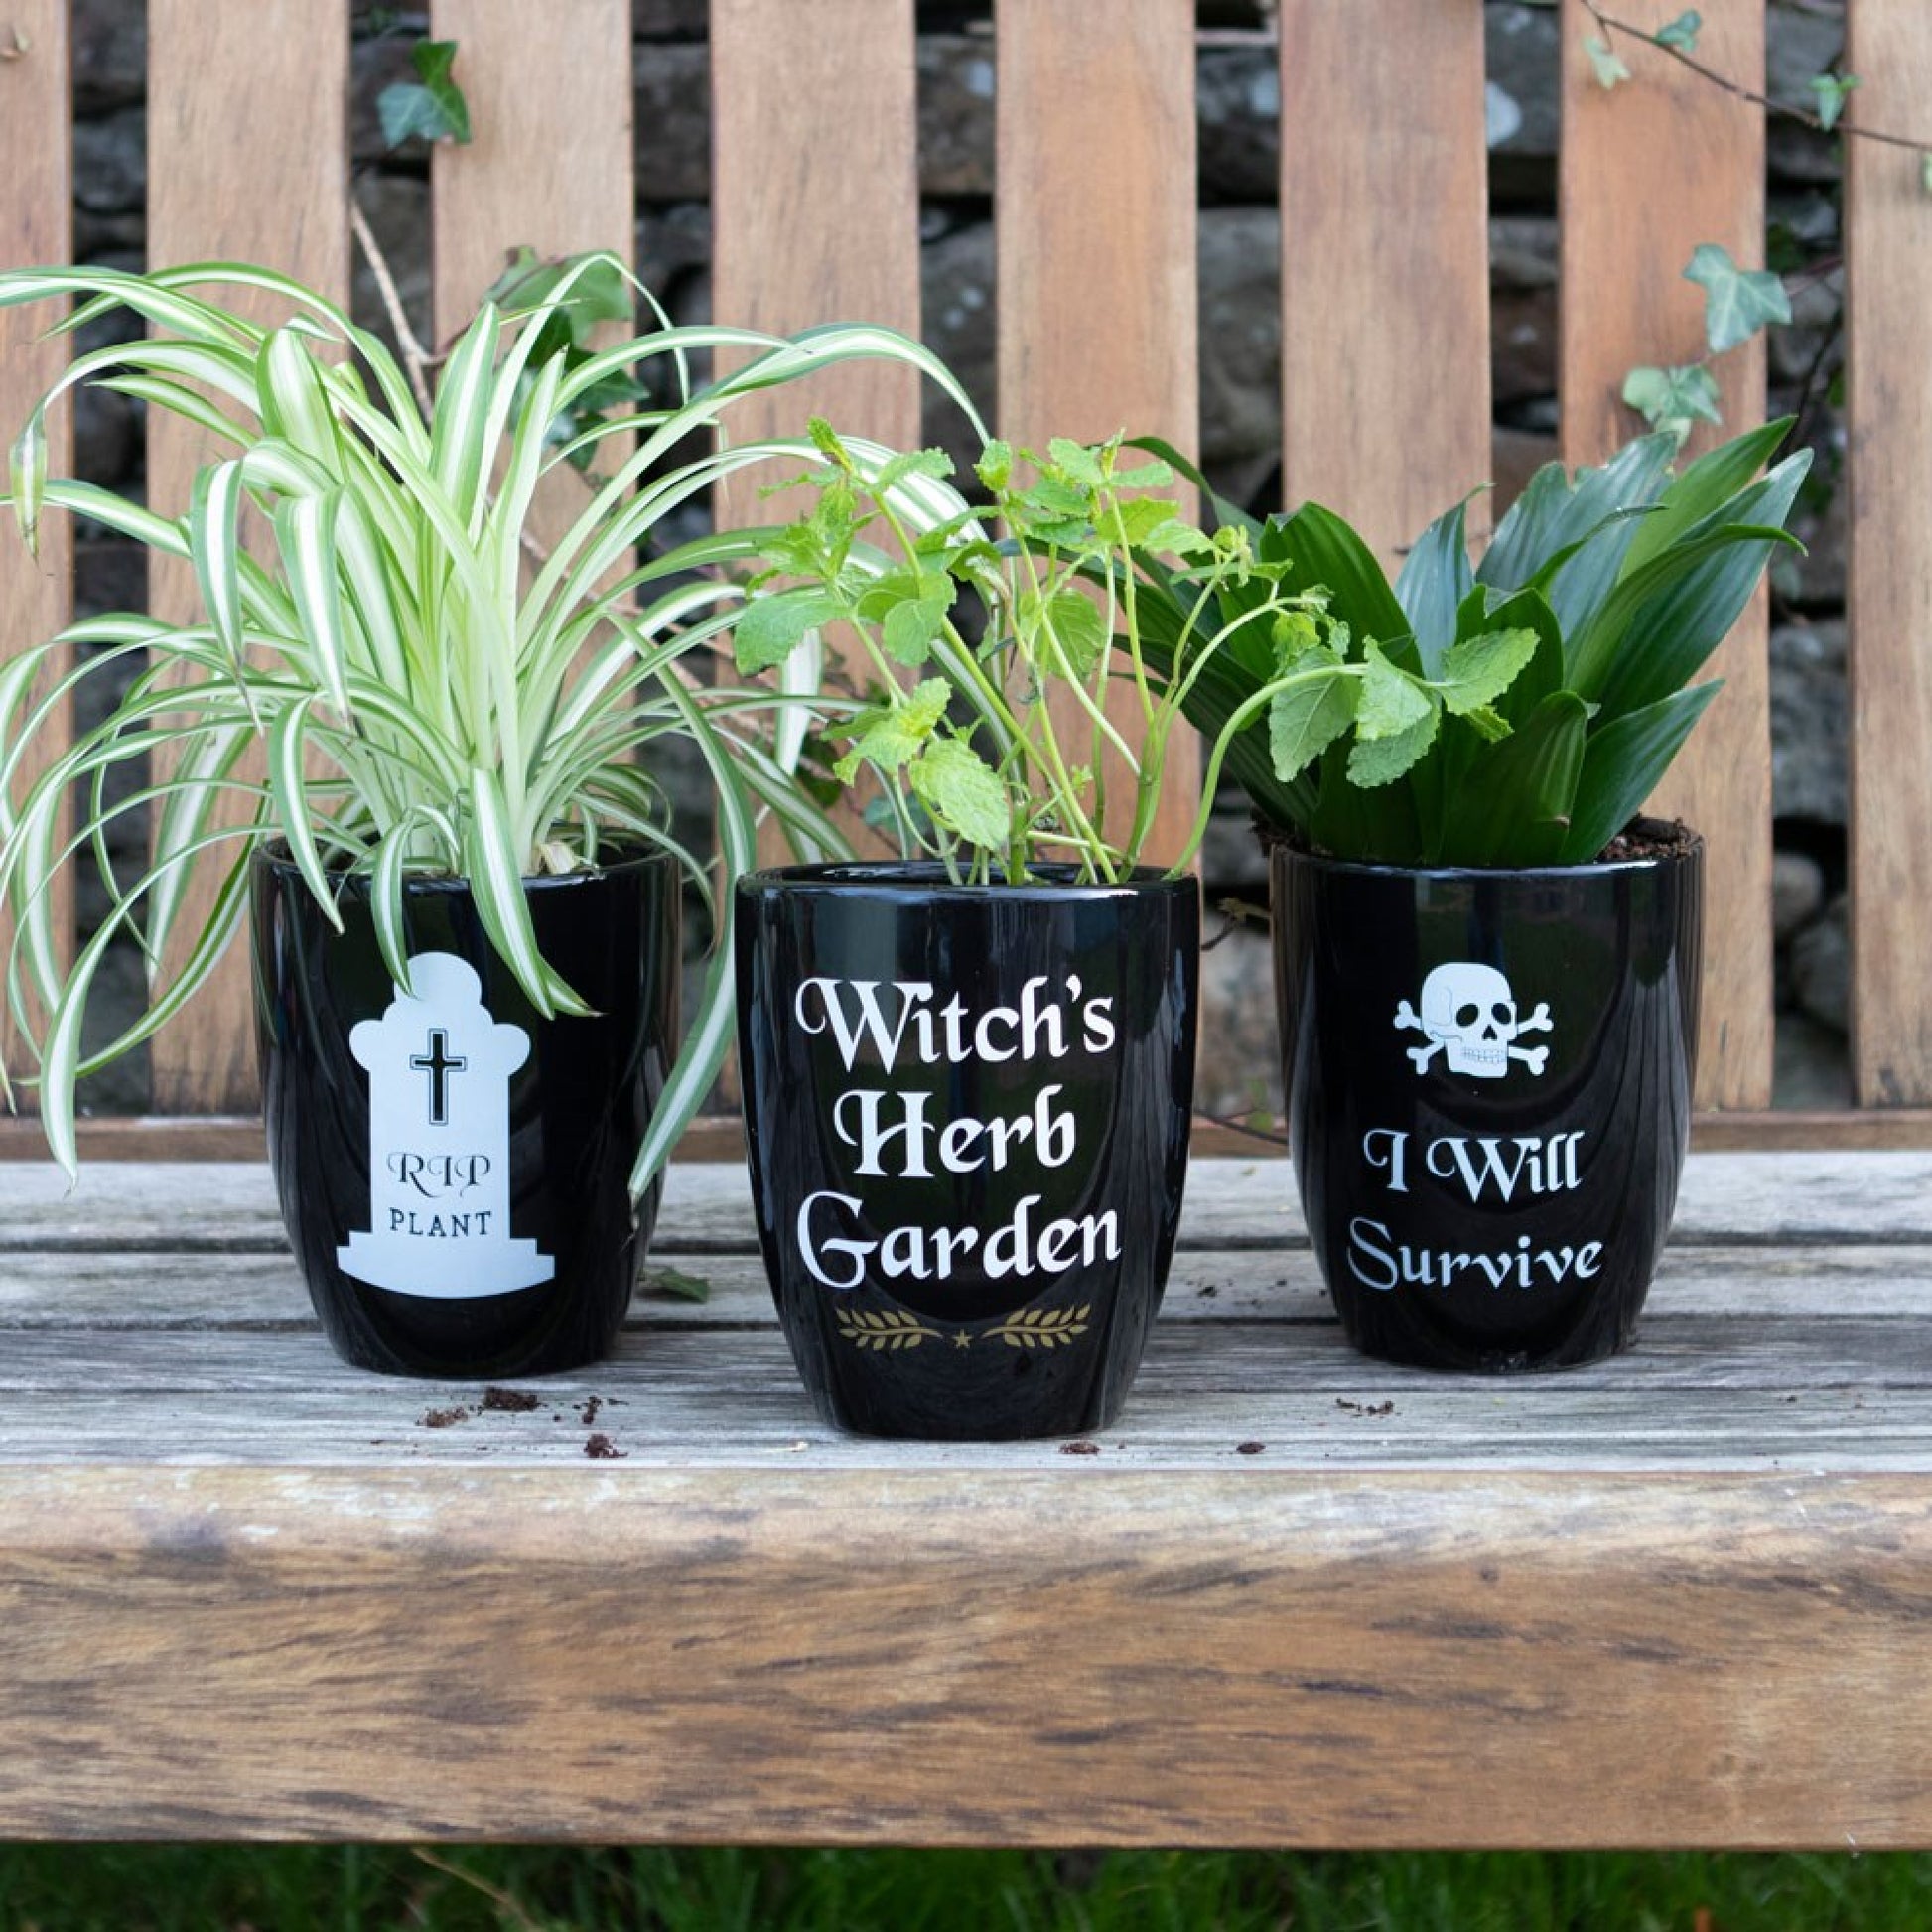 We've all been there, so offer your friends and family some laughs with a dark twist. These will look perfect on any window sill! There three to collect in this series.  This ceramic pot features features a tombstone silhouette with humorous 'RIP plant' text, making it a perfect home for plants both living and dead.  Size: H: 14.5cm x W: 12cm x D: 12cm